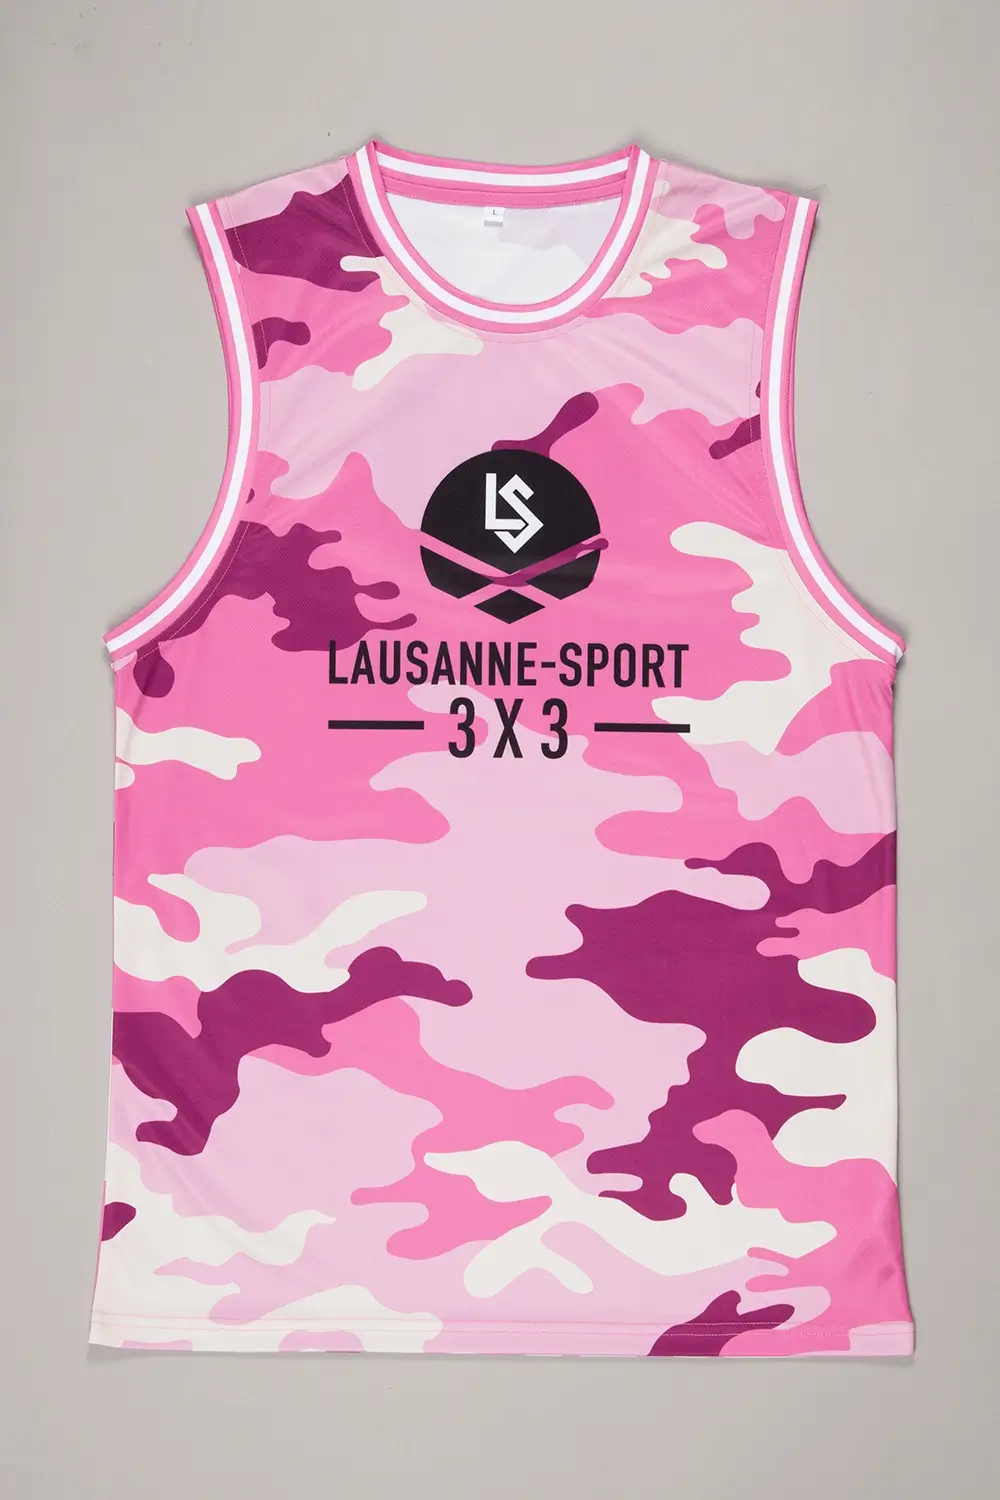 Maillot Military - Lausanne 3x3